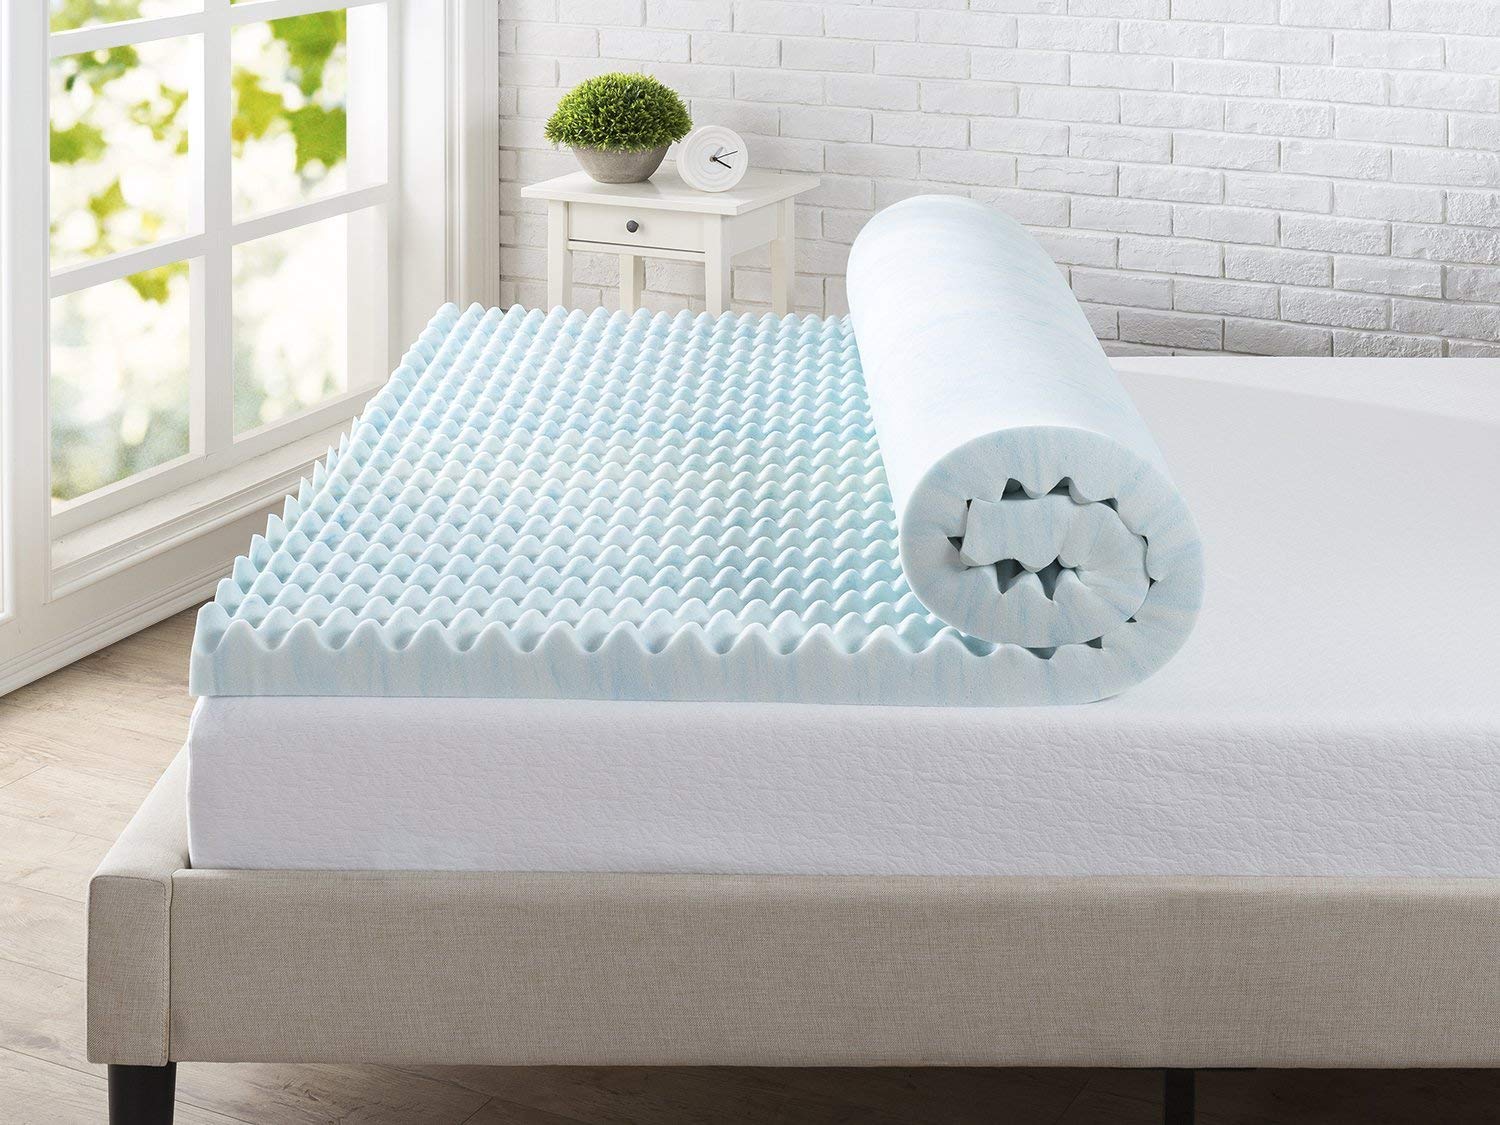 mattress topper to make bed more firm